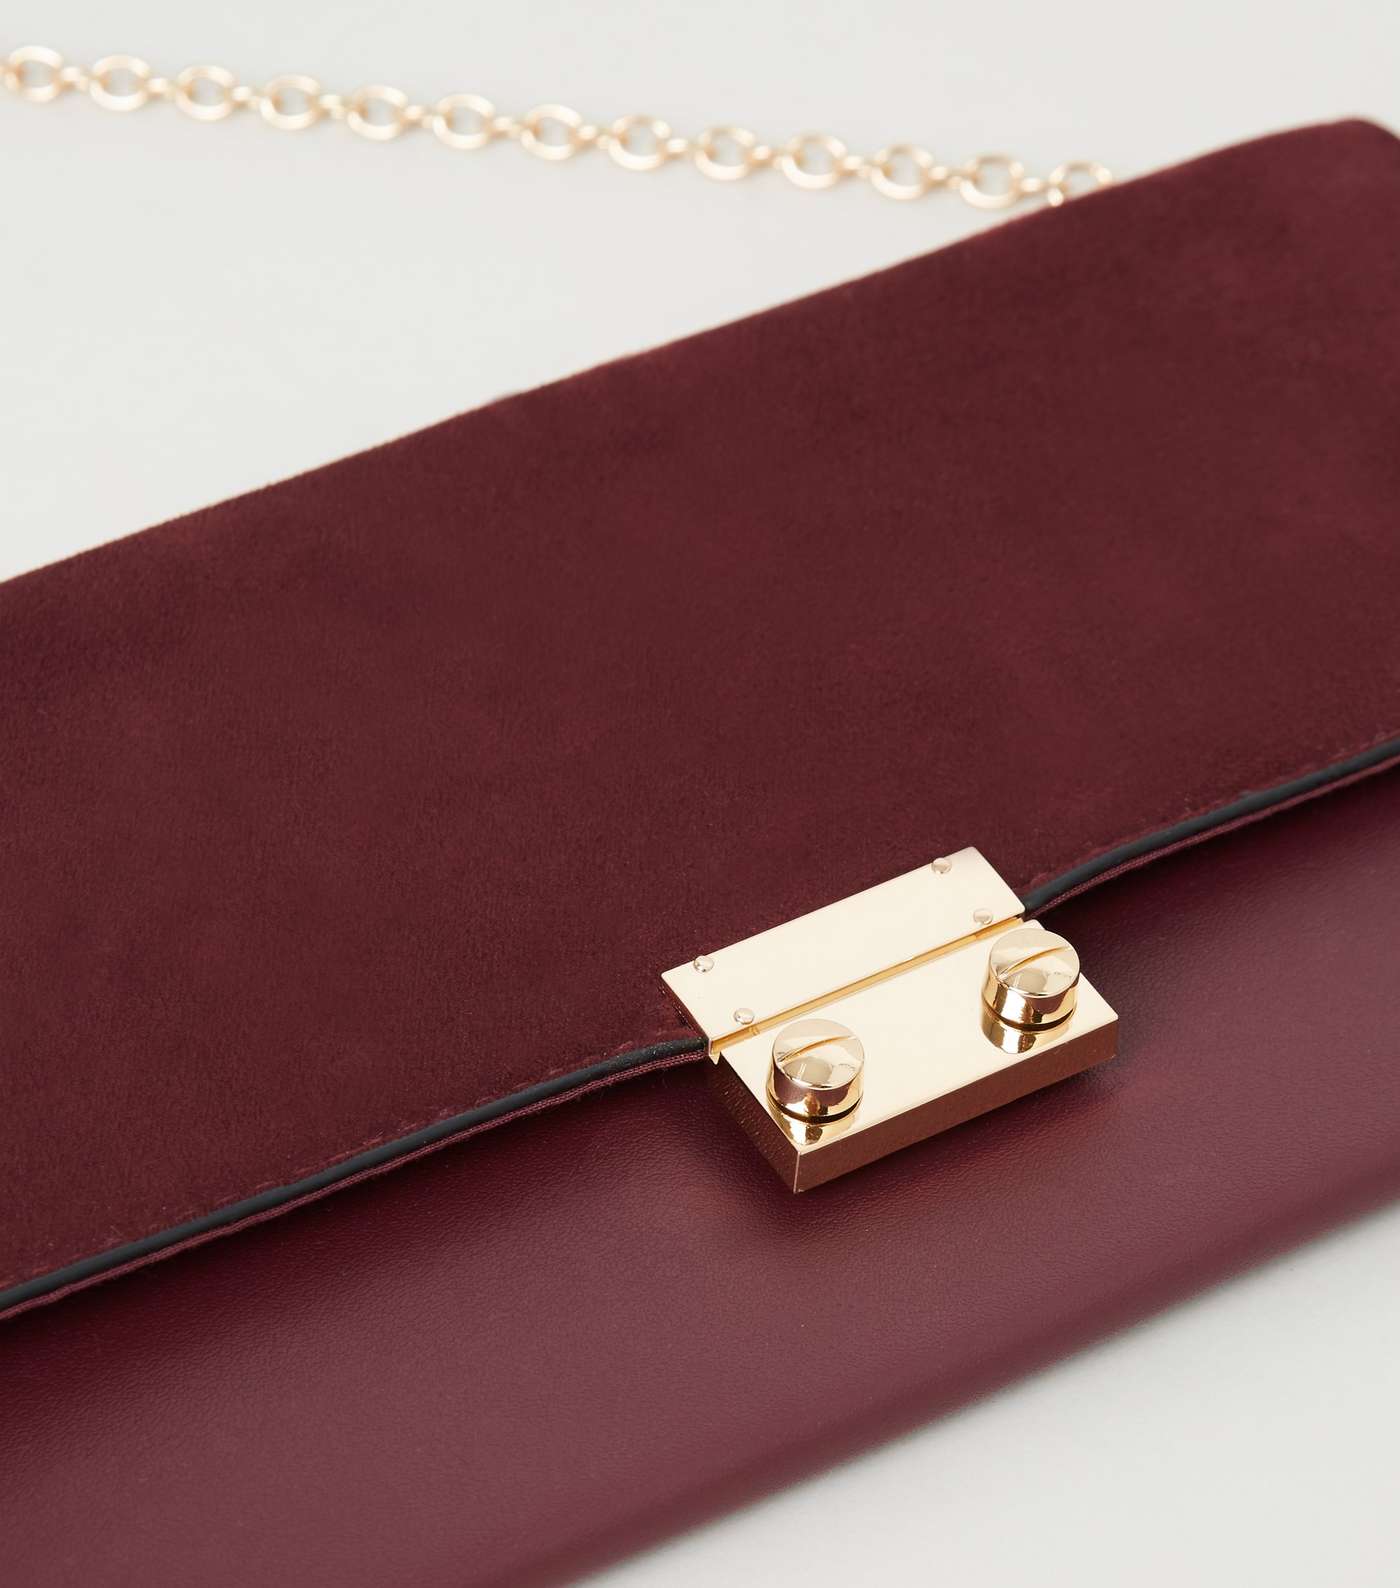 Burgundy Leather-Look Suedette Clutch Bag Image 3